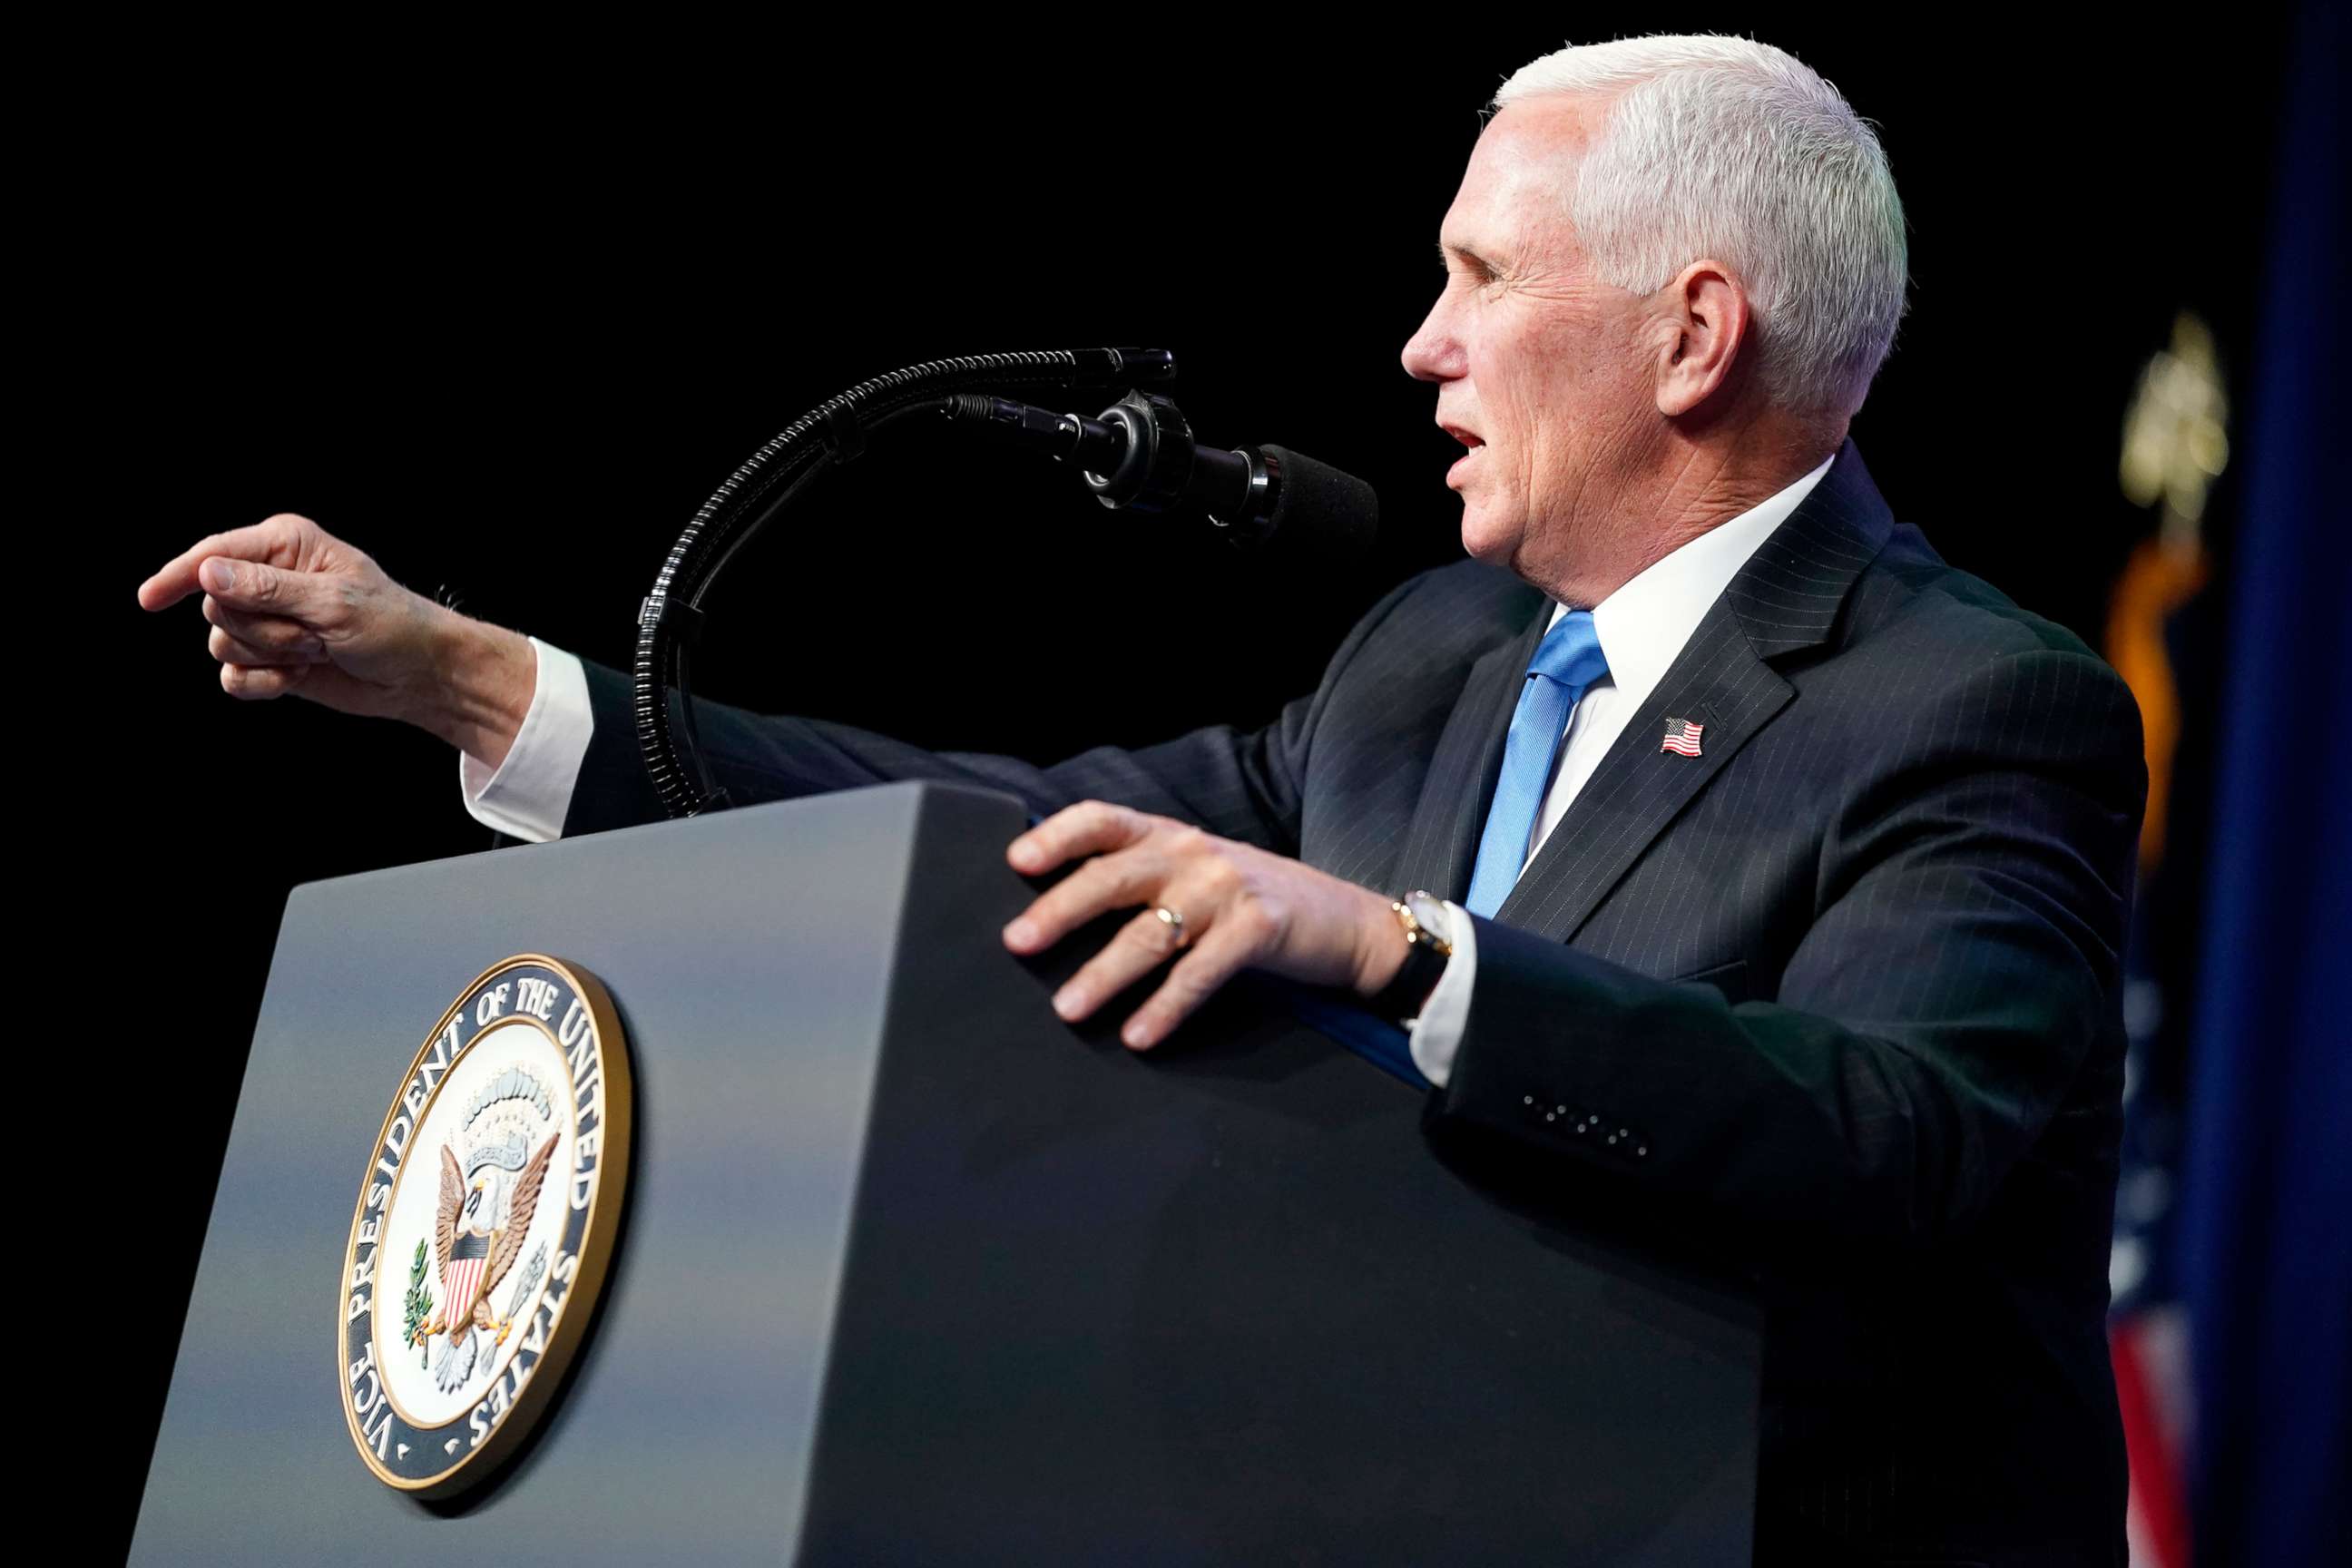 PHOTO: Vice President Mike Pence speaks at the 2020 Republican National Convention in Charlotte, Aug. 24, 2020.